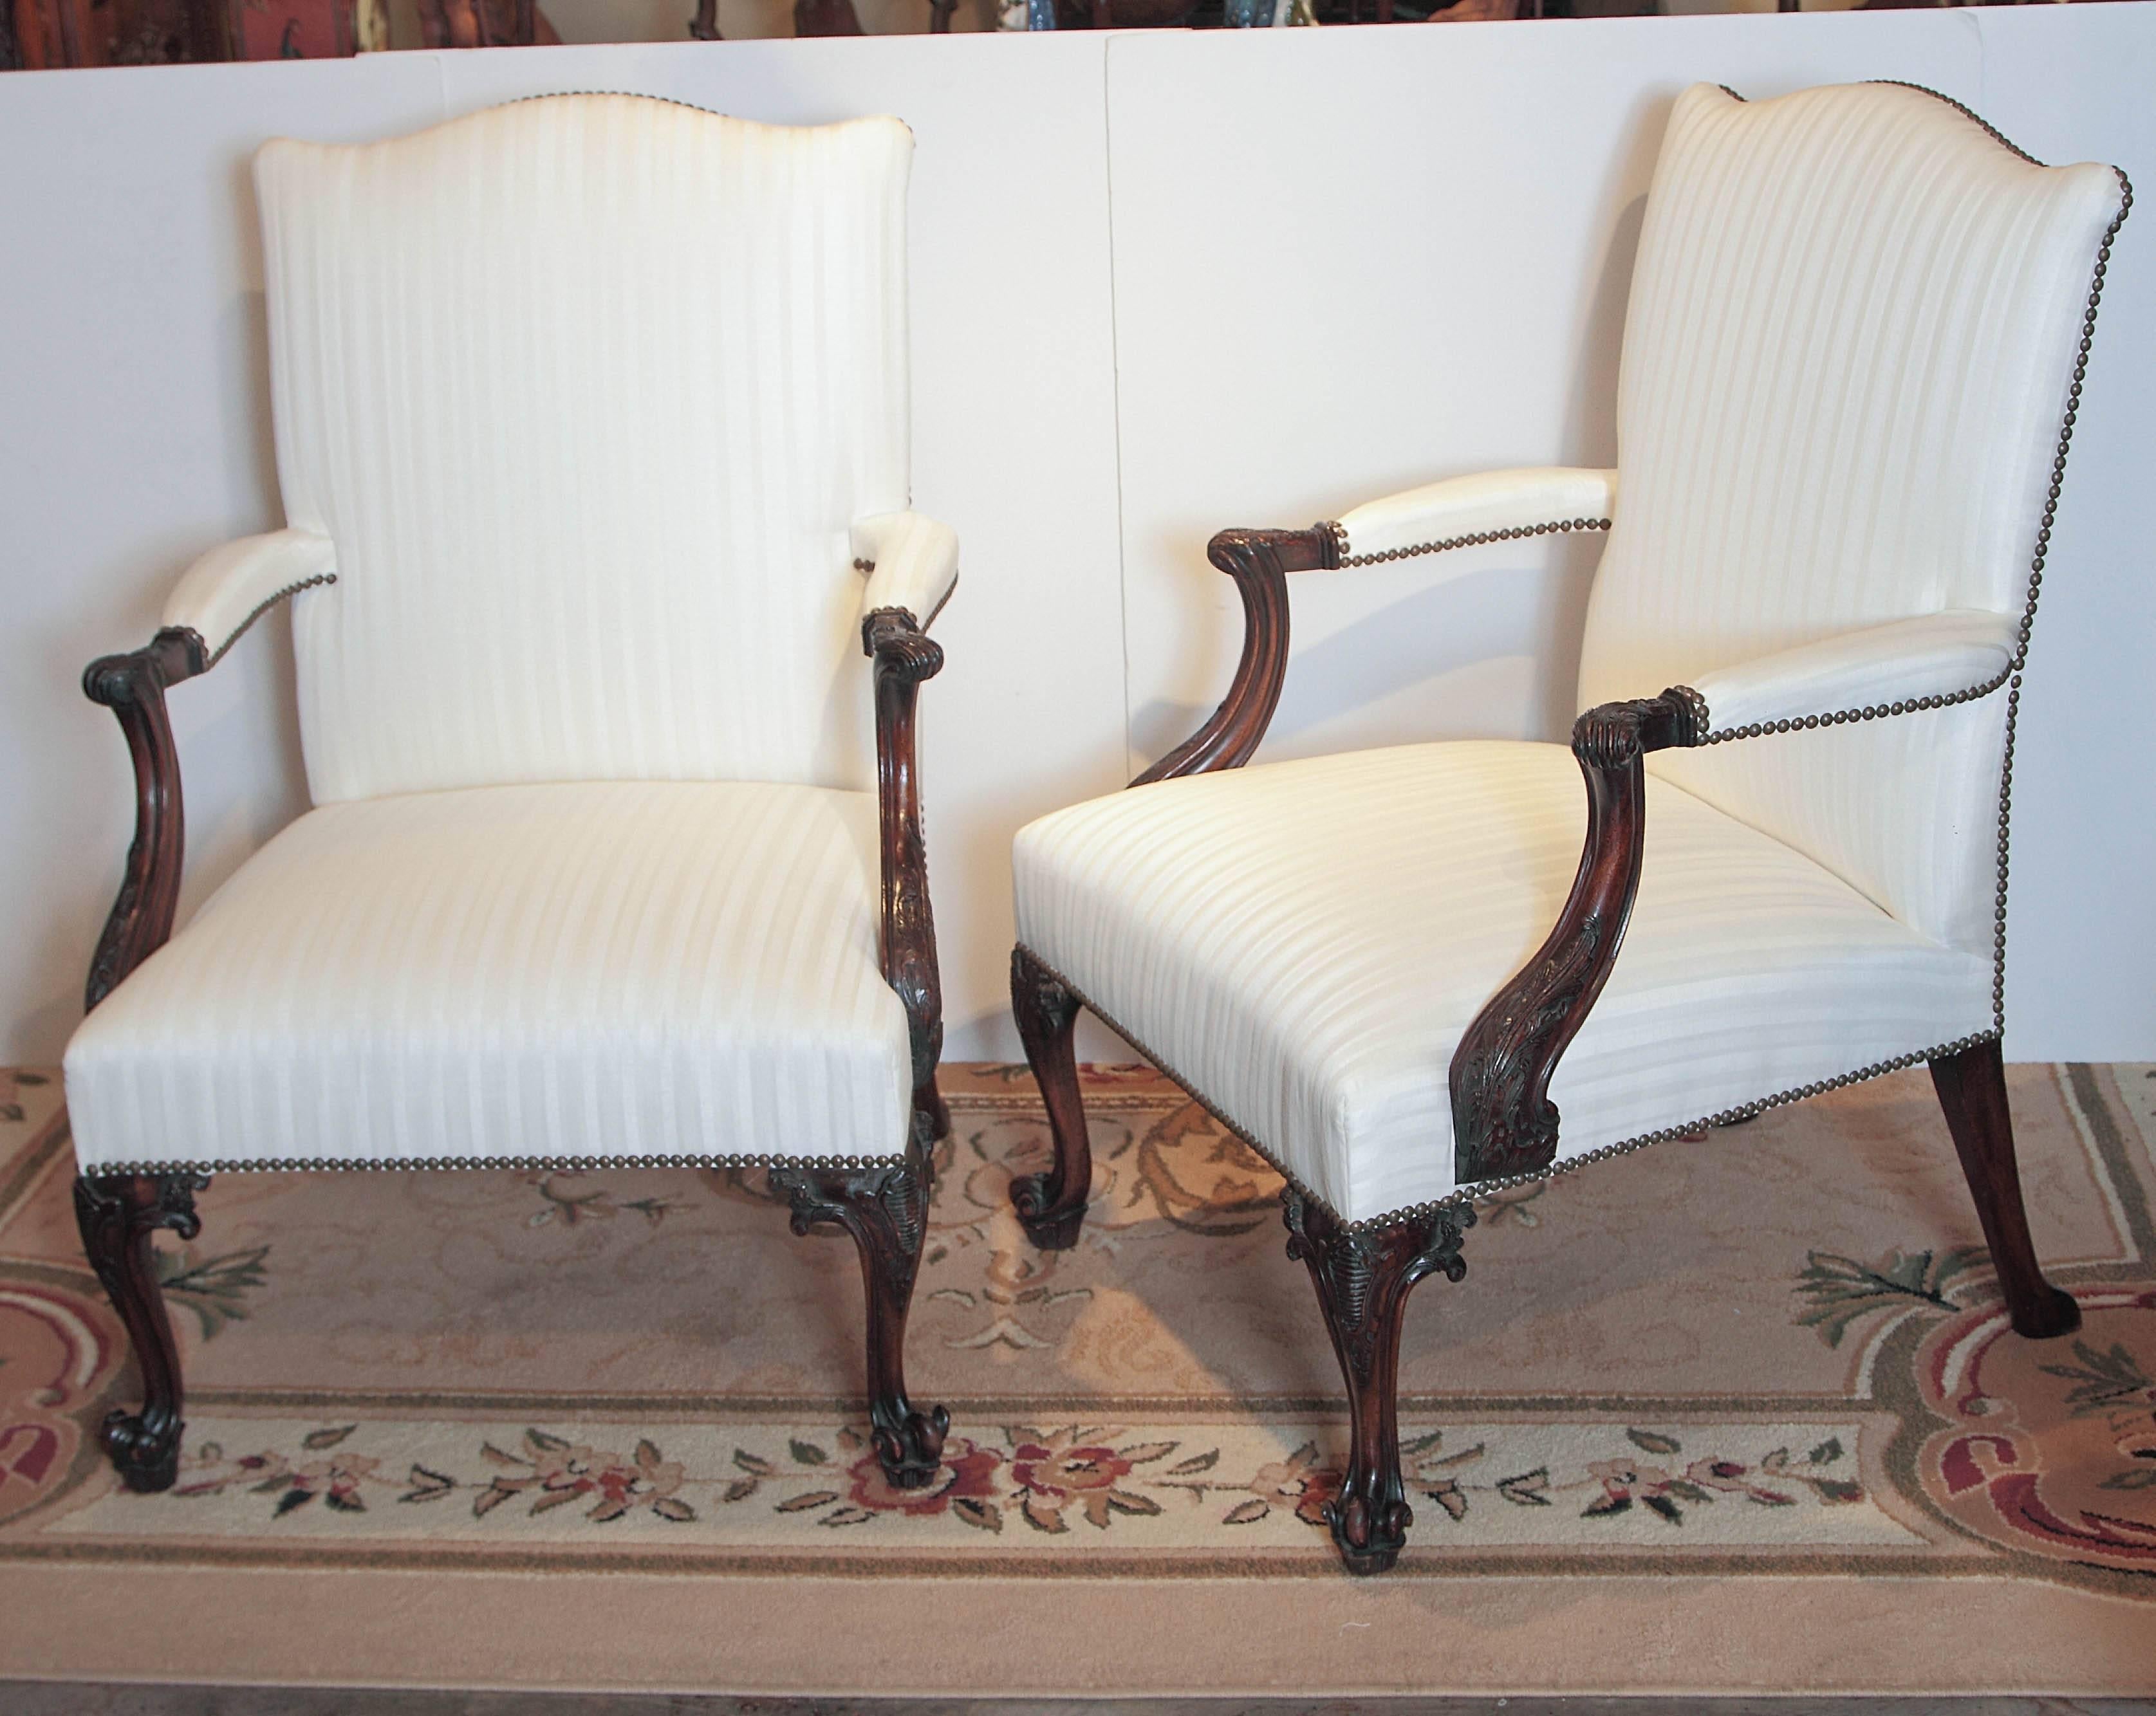 Pair of 19th century English Georgian mahogany hand-carved armchairs. Beautiful deep hand carving with a nice aged mahogany patina. Covered in a stripe silk.